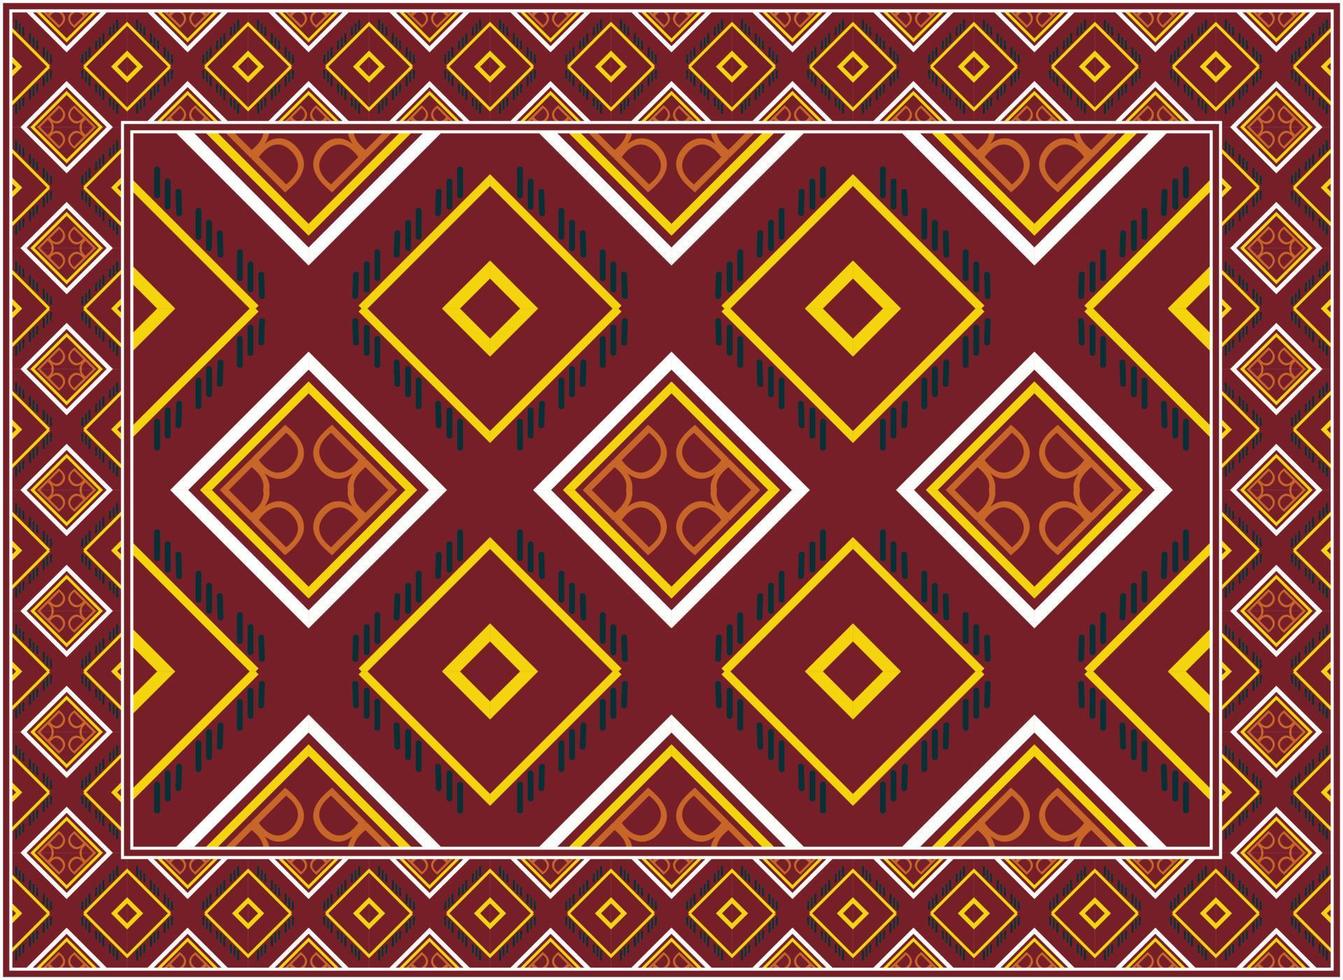 Modern decorating with oriental rugs, Motif Ethnic seamless Pattern Boho Persian rug living room African Ethnic Aztec style design for print fabric Carpets, towels, handkerchiefs, scarves rug, vector